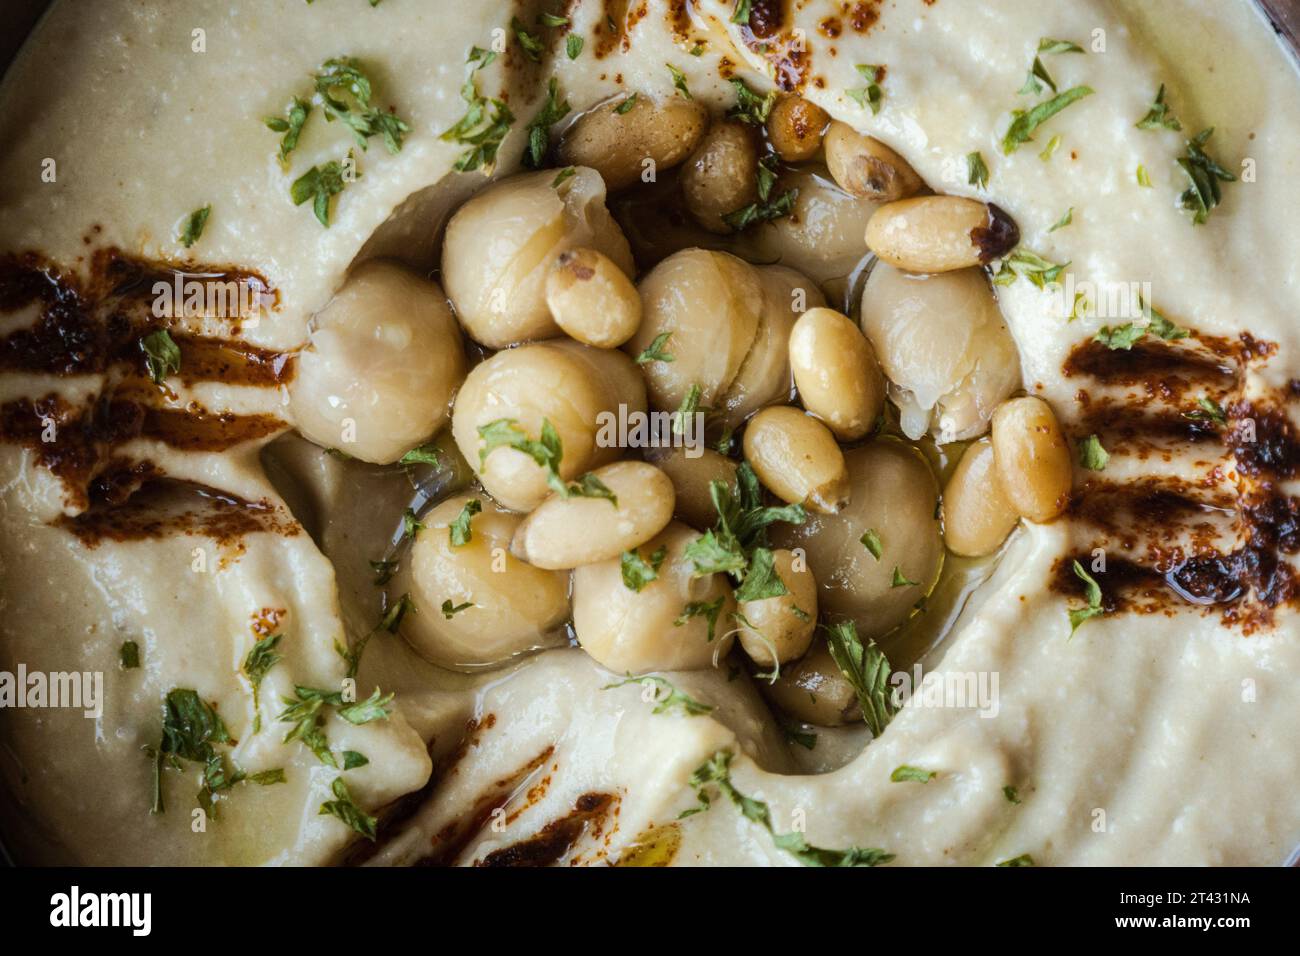 Full frame Overhead view of a bowl of hummus with chickpeas, olive oil and spices Stock Photo